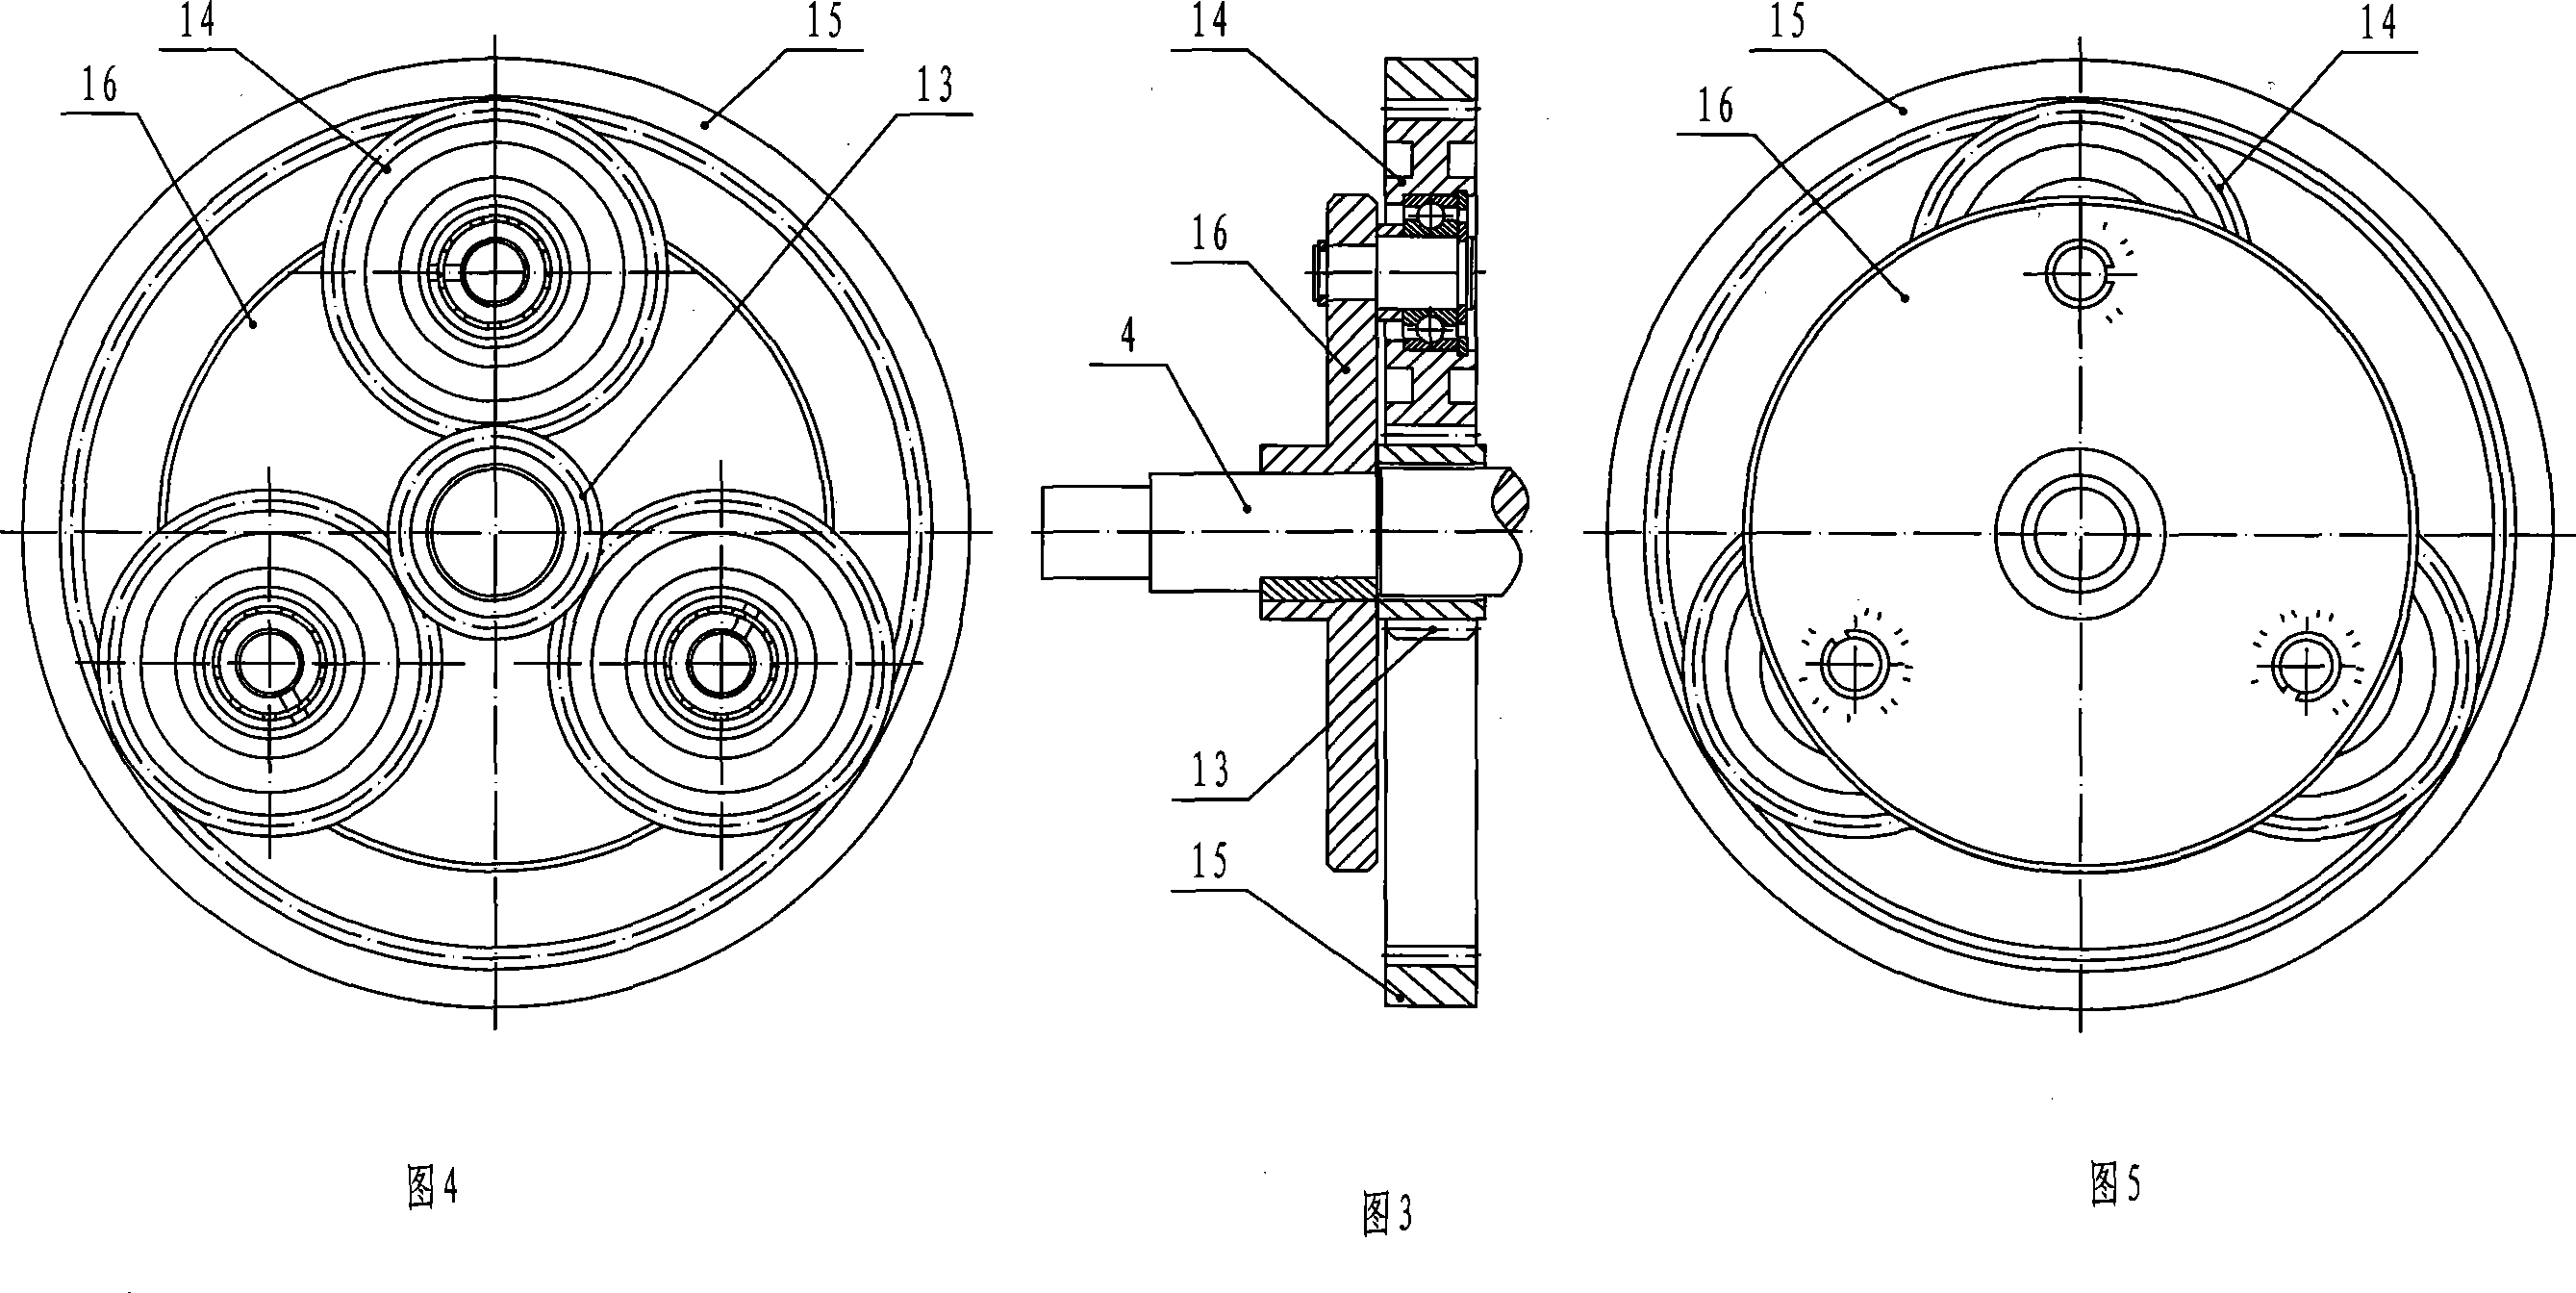 Electric vehicle driving device with speed variator and flexible combination